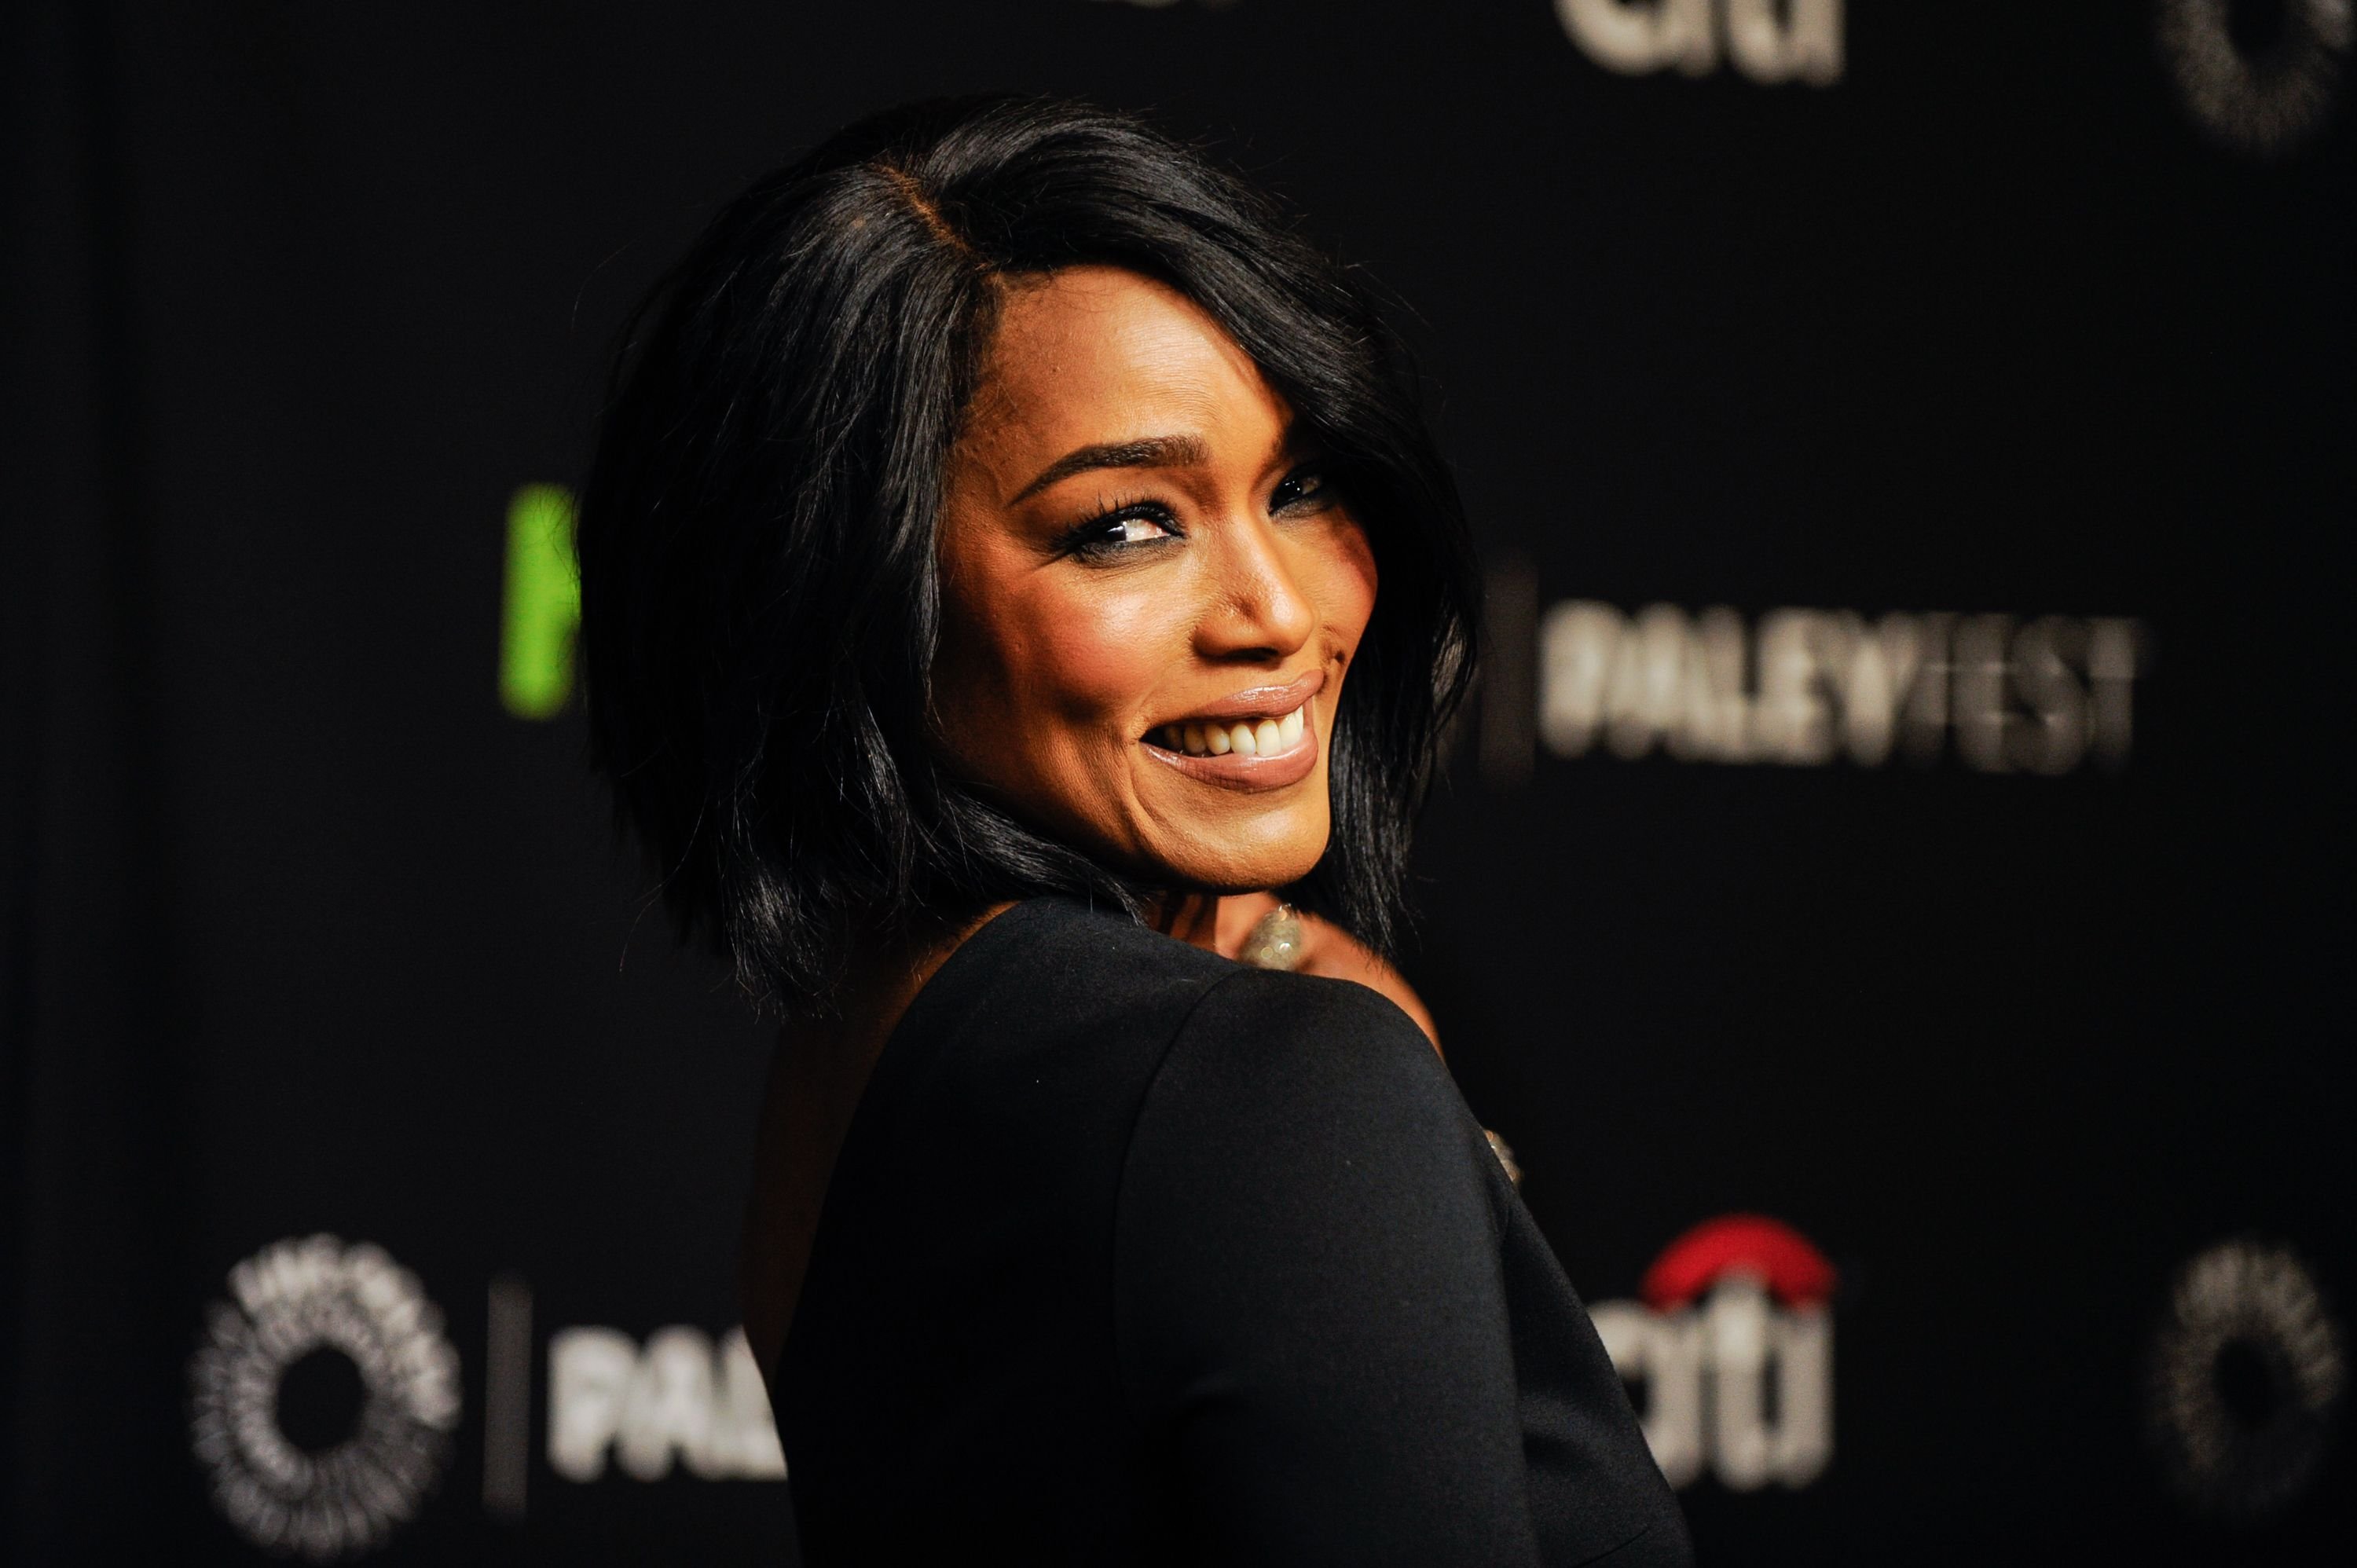  Angela Bassett at The Paley Center For Media's 33rd Annual PaleyFest on March 20, 2016 in Hollywood. | Photo: Getty Images